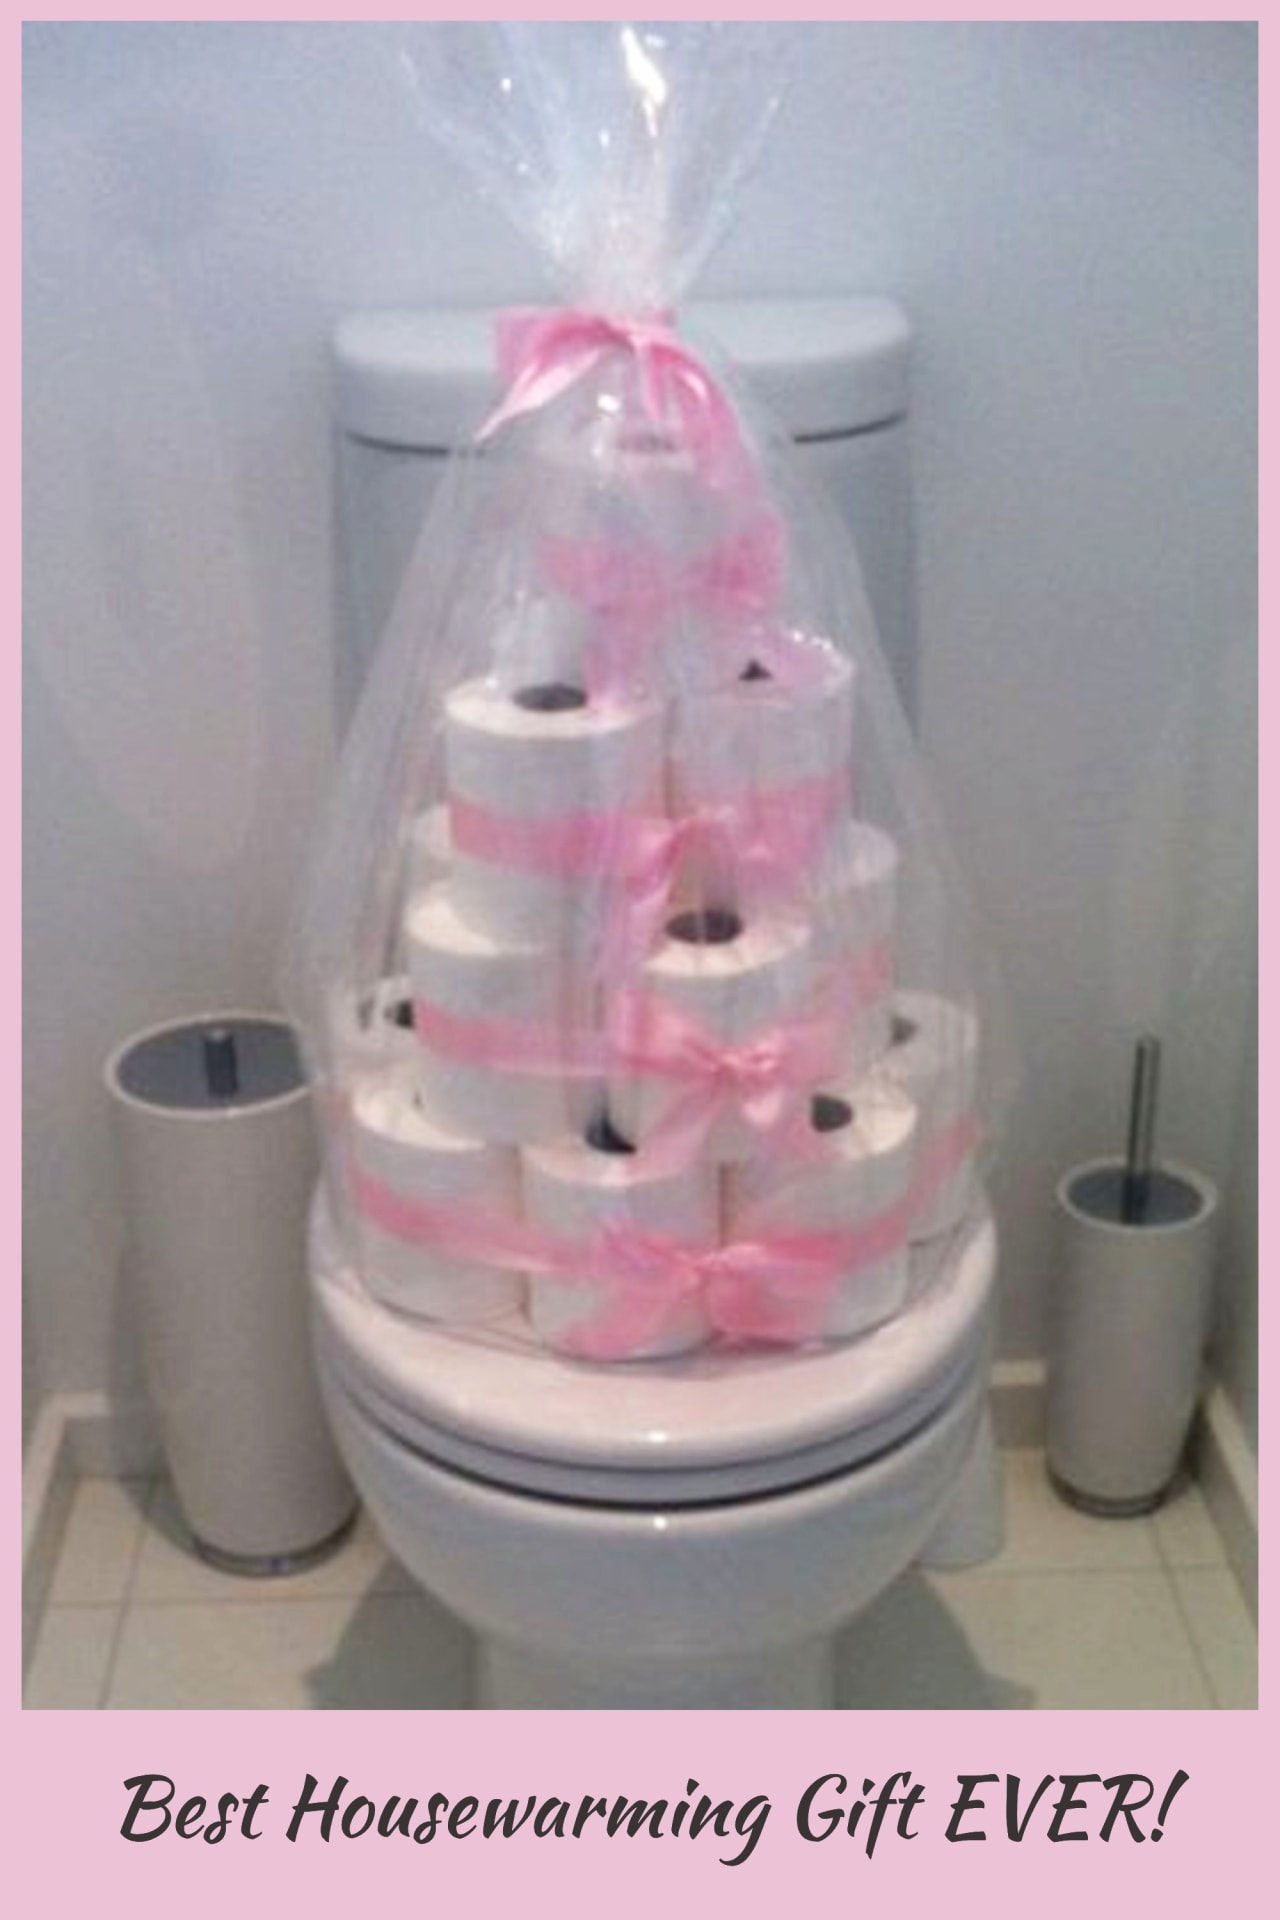 Best housewarming gift EVER!  Such practical and useful housewarming gift ideas for first time homeowners in their very first home - toilet paper tower welcome to your new home gift basket ideas